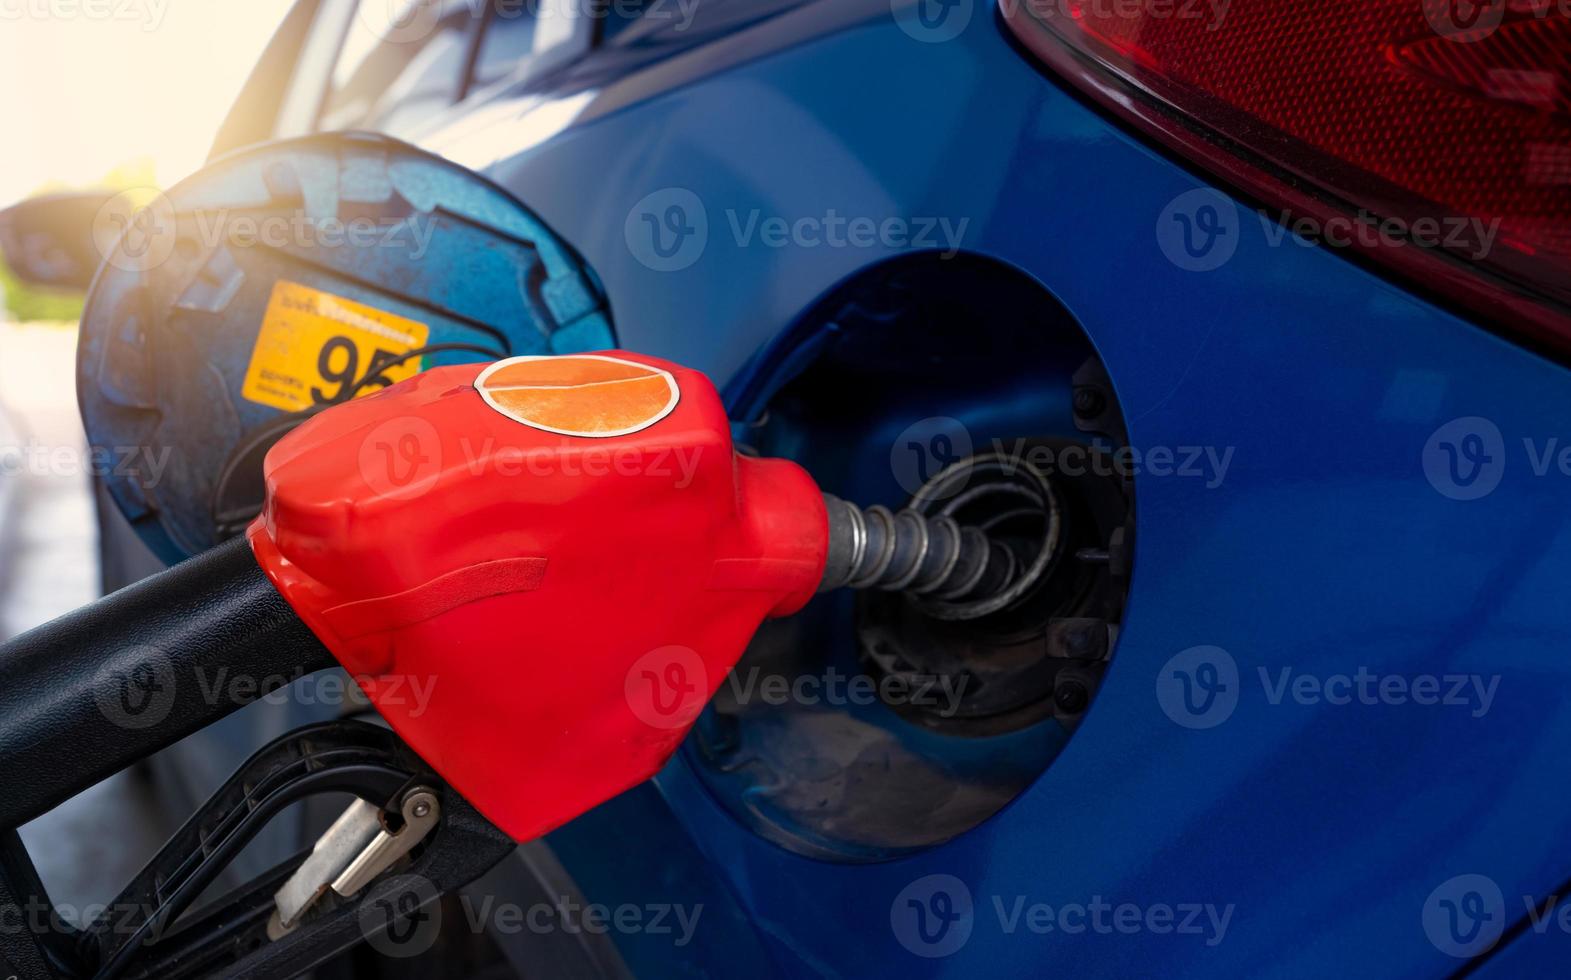 Car fueling at gas station. Refuel fill up with petrol gasoline. Petrol pump filling fuel nozzle in fuel tank of car at gas station. Petrol industry and service. Petrol price and oil crisis concept. photo